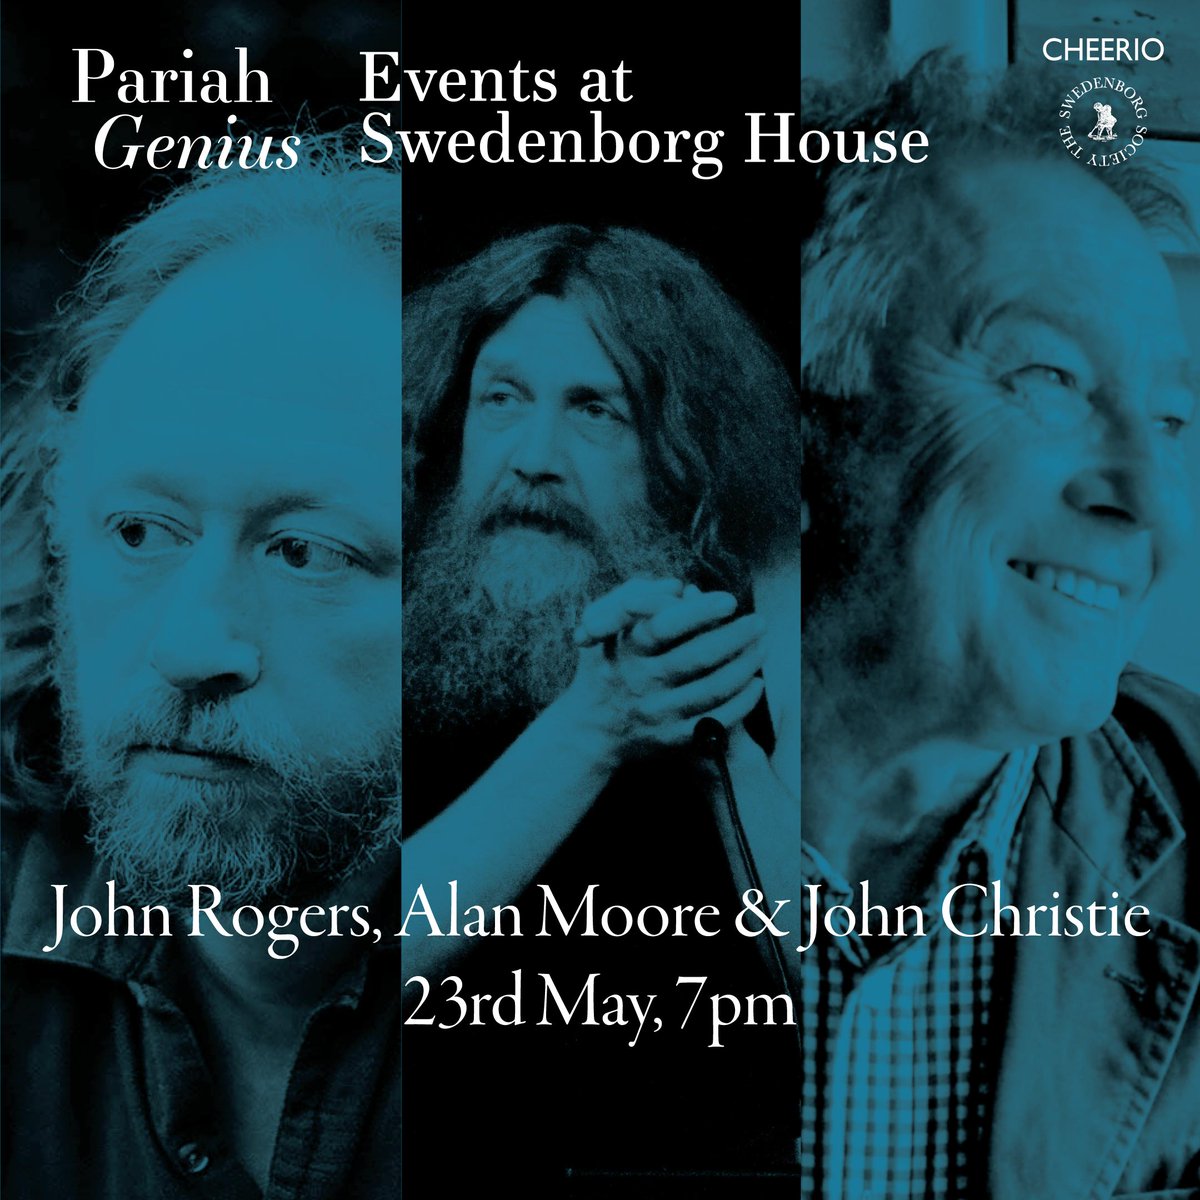 Join artist John Christie and filmmaker John Rogers in conversation with Iain Sinclair about his new book 'Pariah Genius'. W/ author Alan Moore (recorded). Thursday 23 May 7pm-8.30pm: eventbrite.com/e/pariah-geniu… @CHEERIOPublish @LRBbookshop